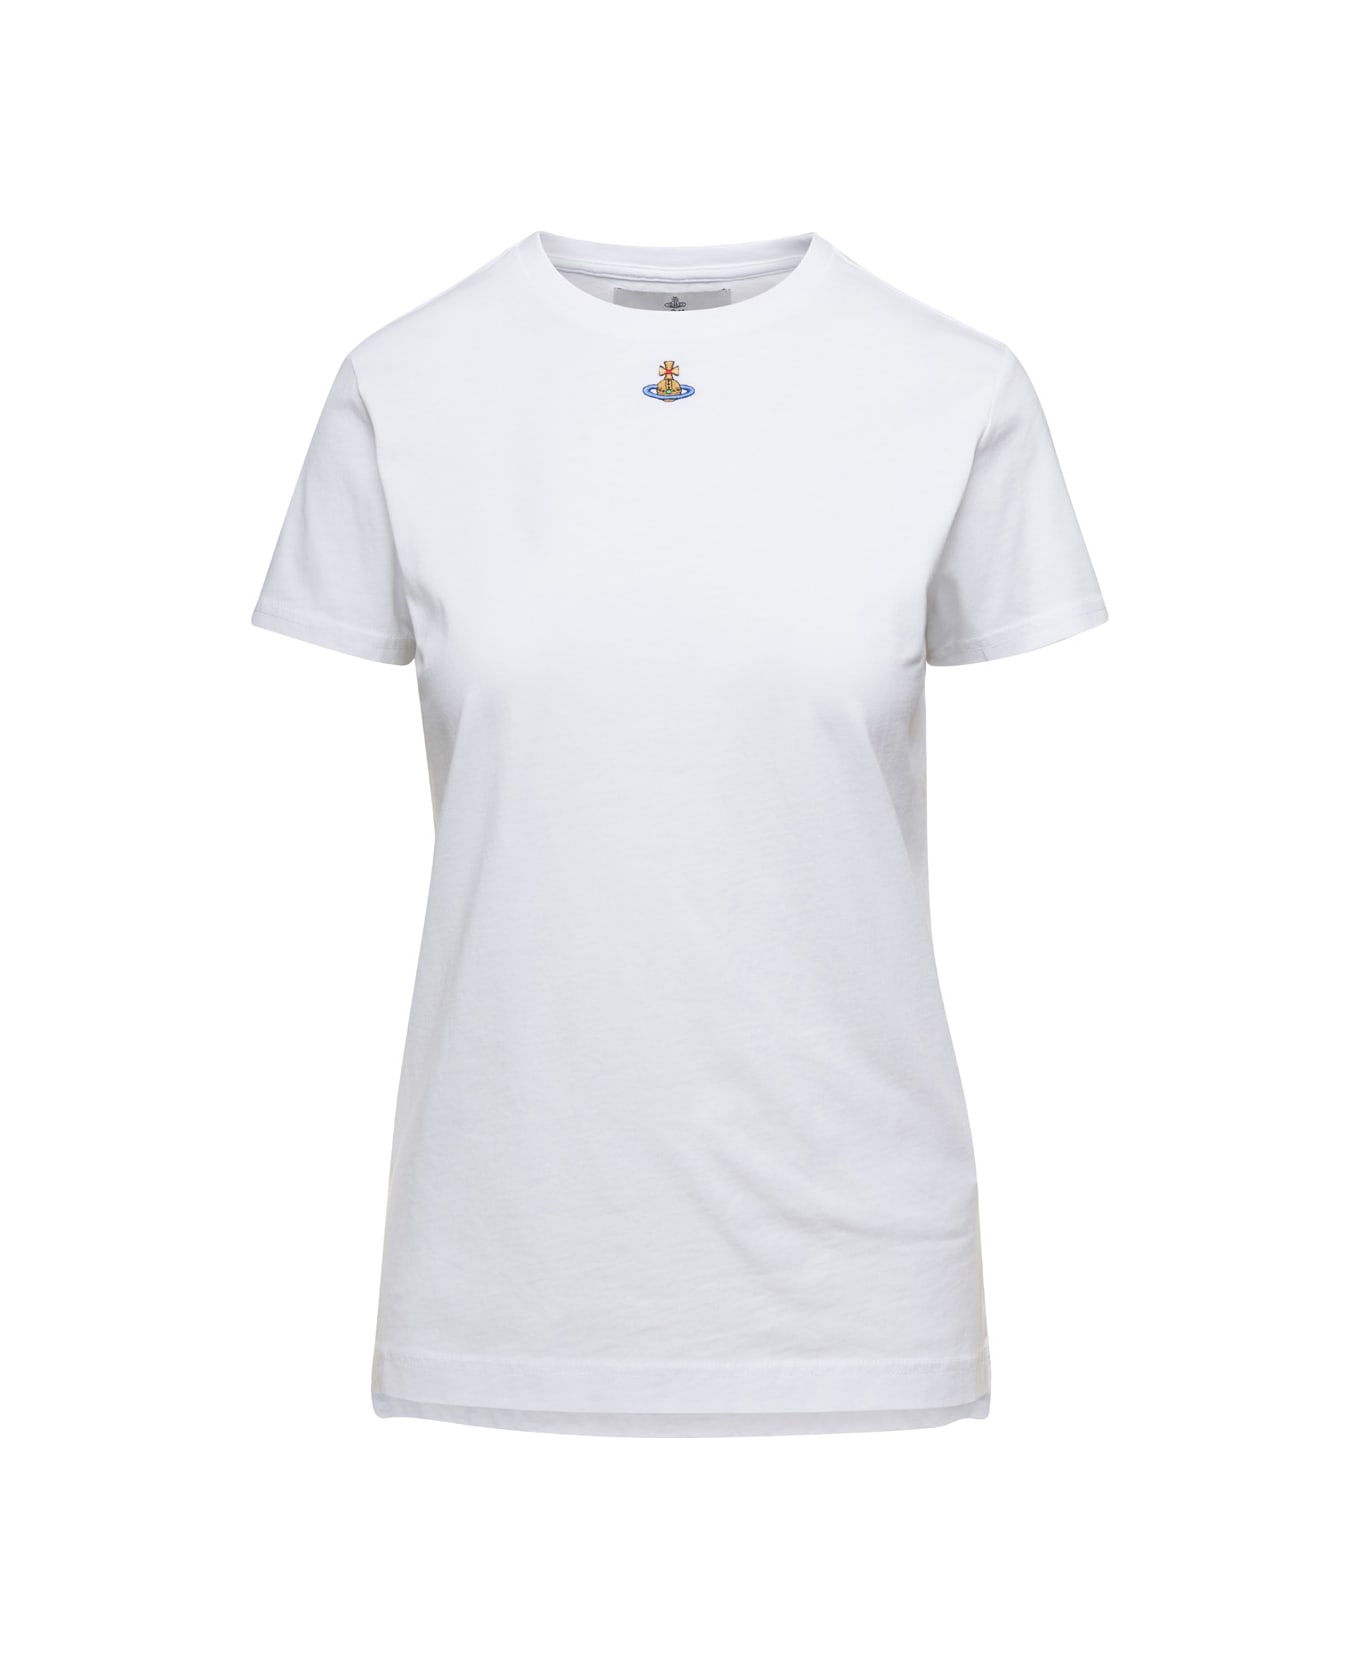 Vivienne Westwood White Crewneck T-shirt With Signature Orb Logo In Cotton Woman - White